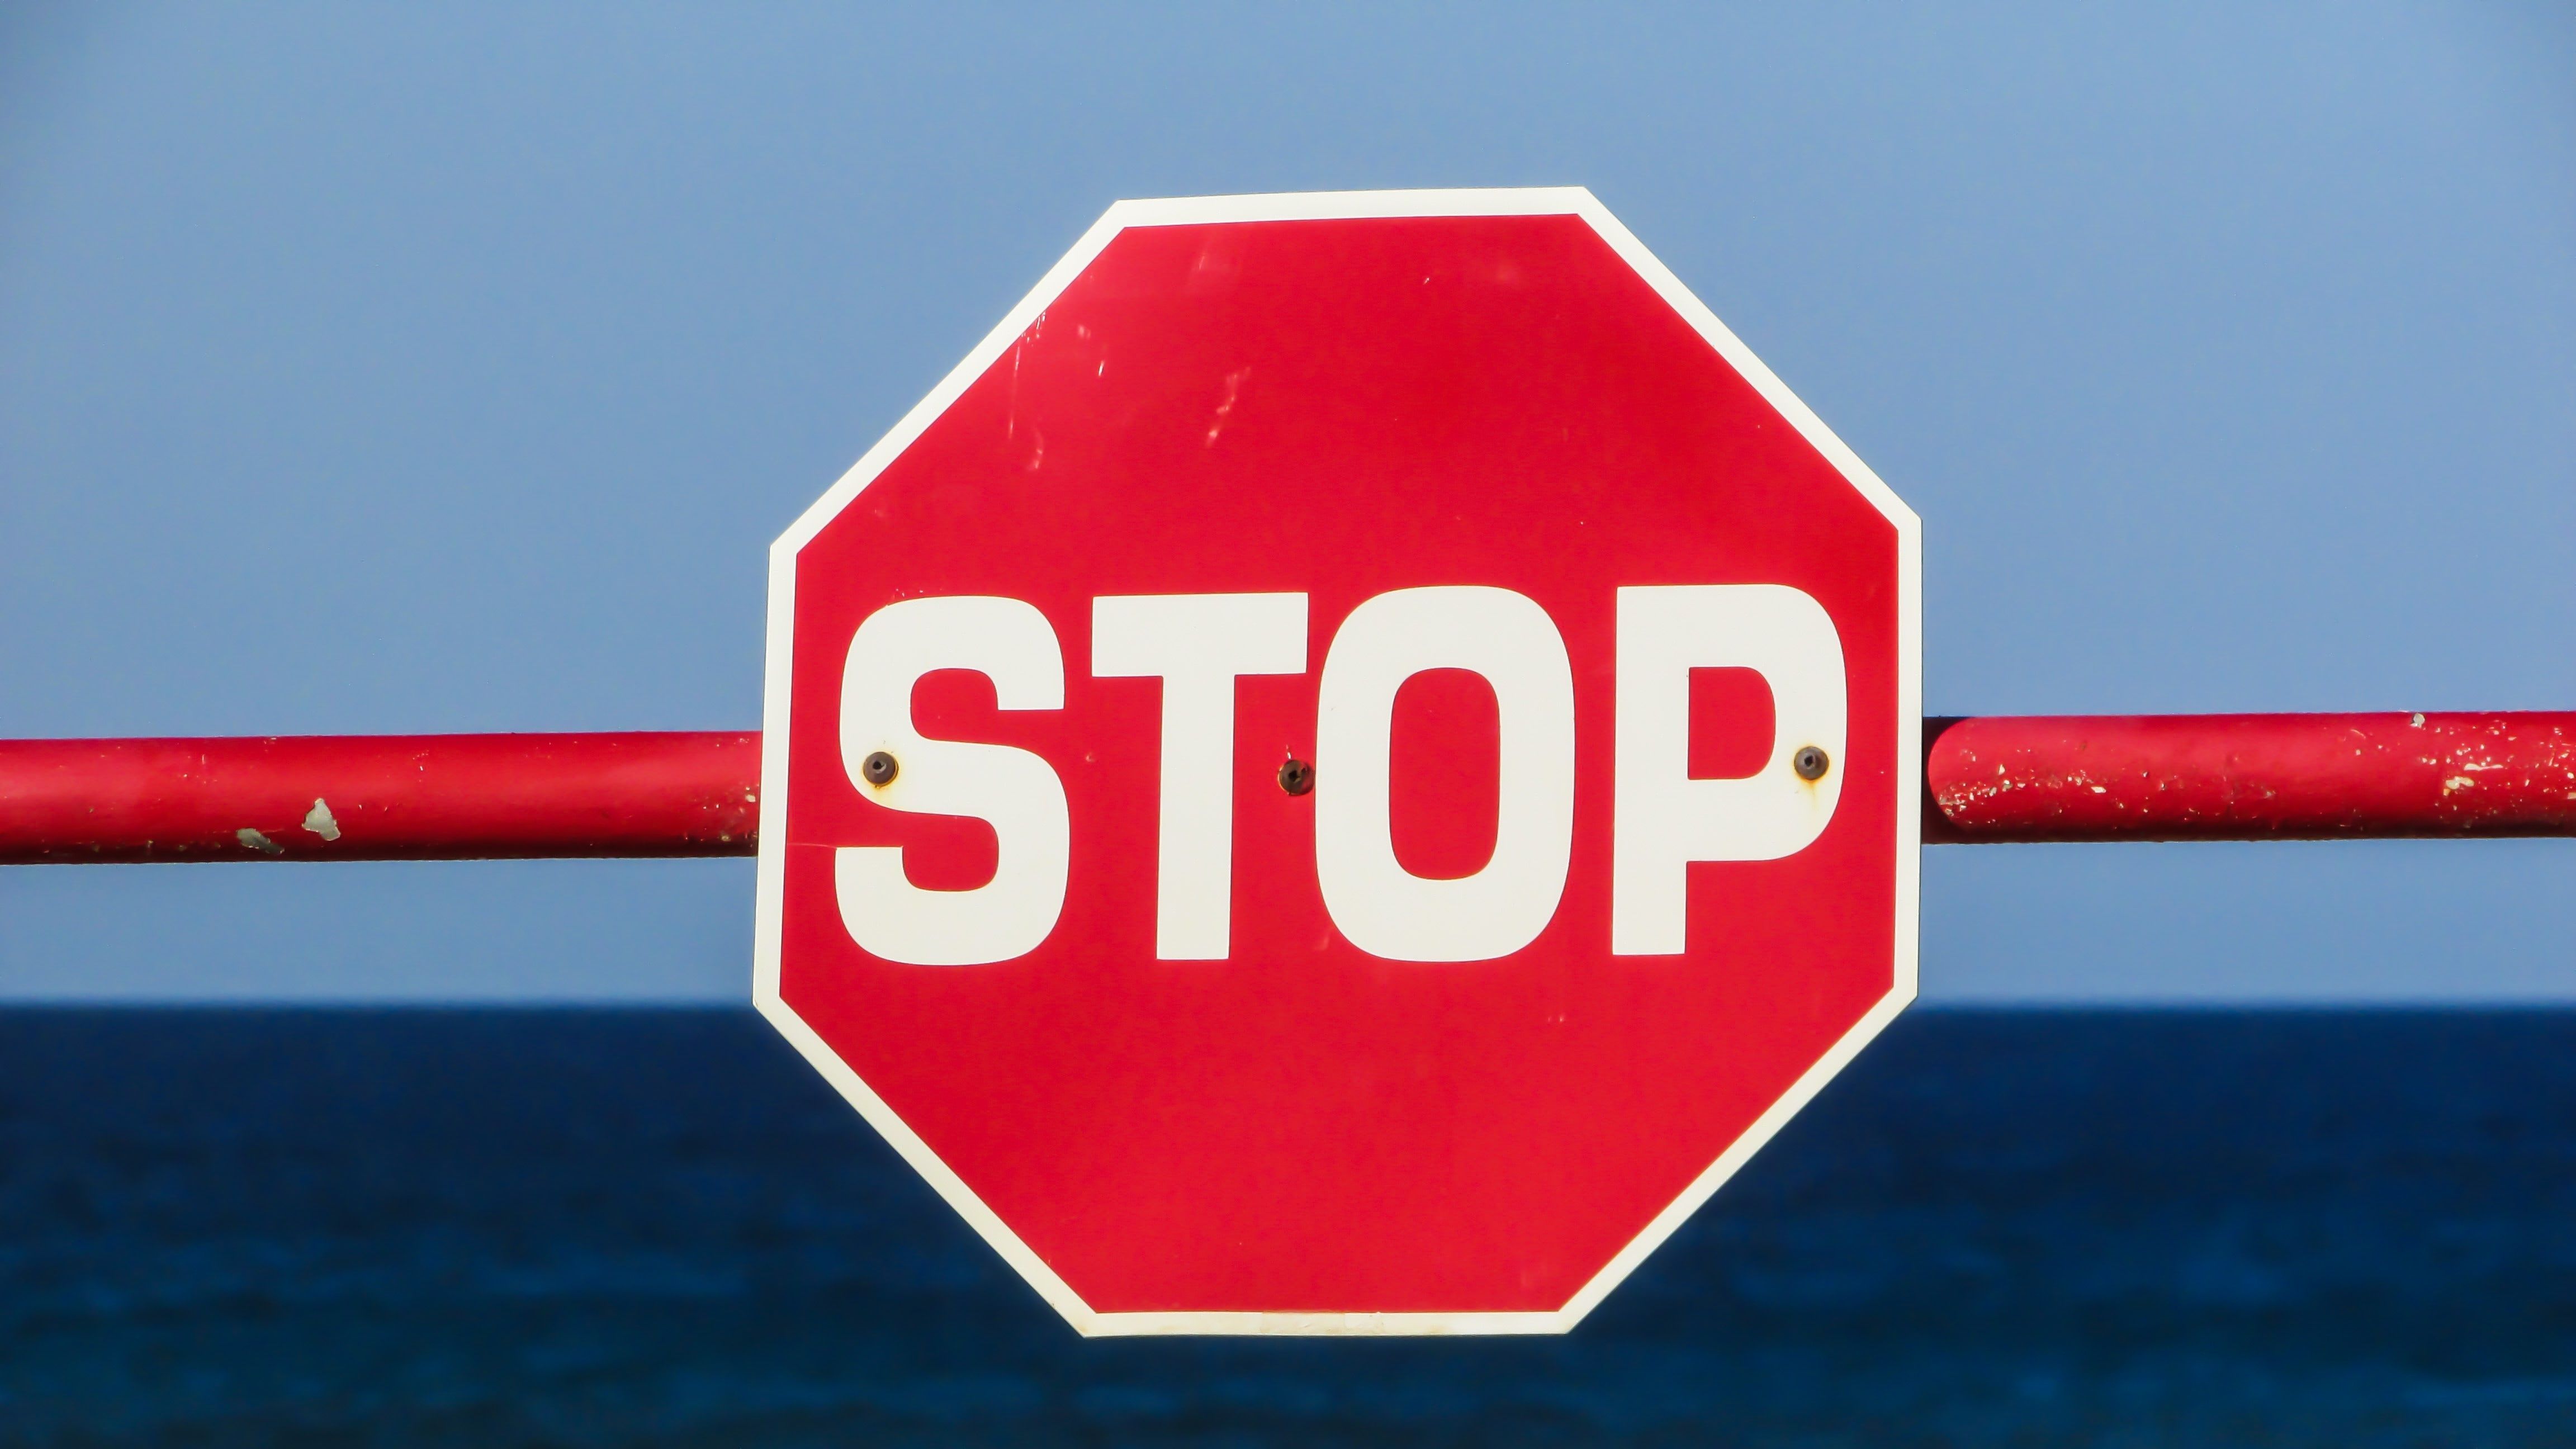 Stop Sign Widescreen Wallpaper Background 62842 4608x2592px